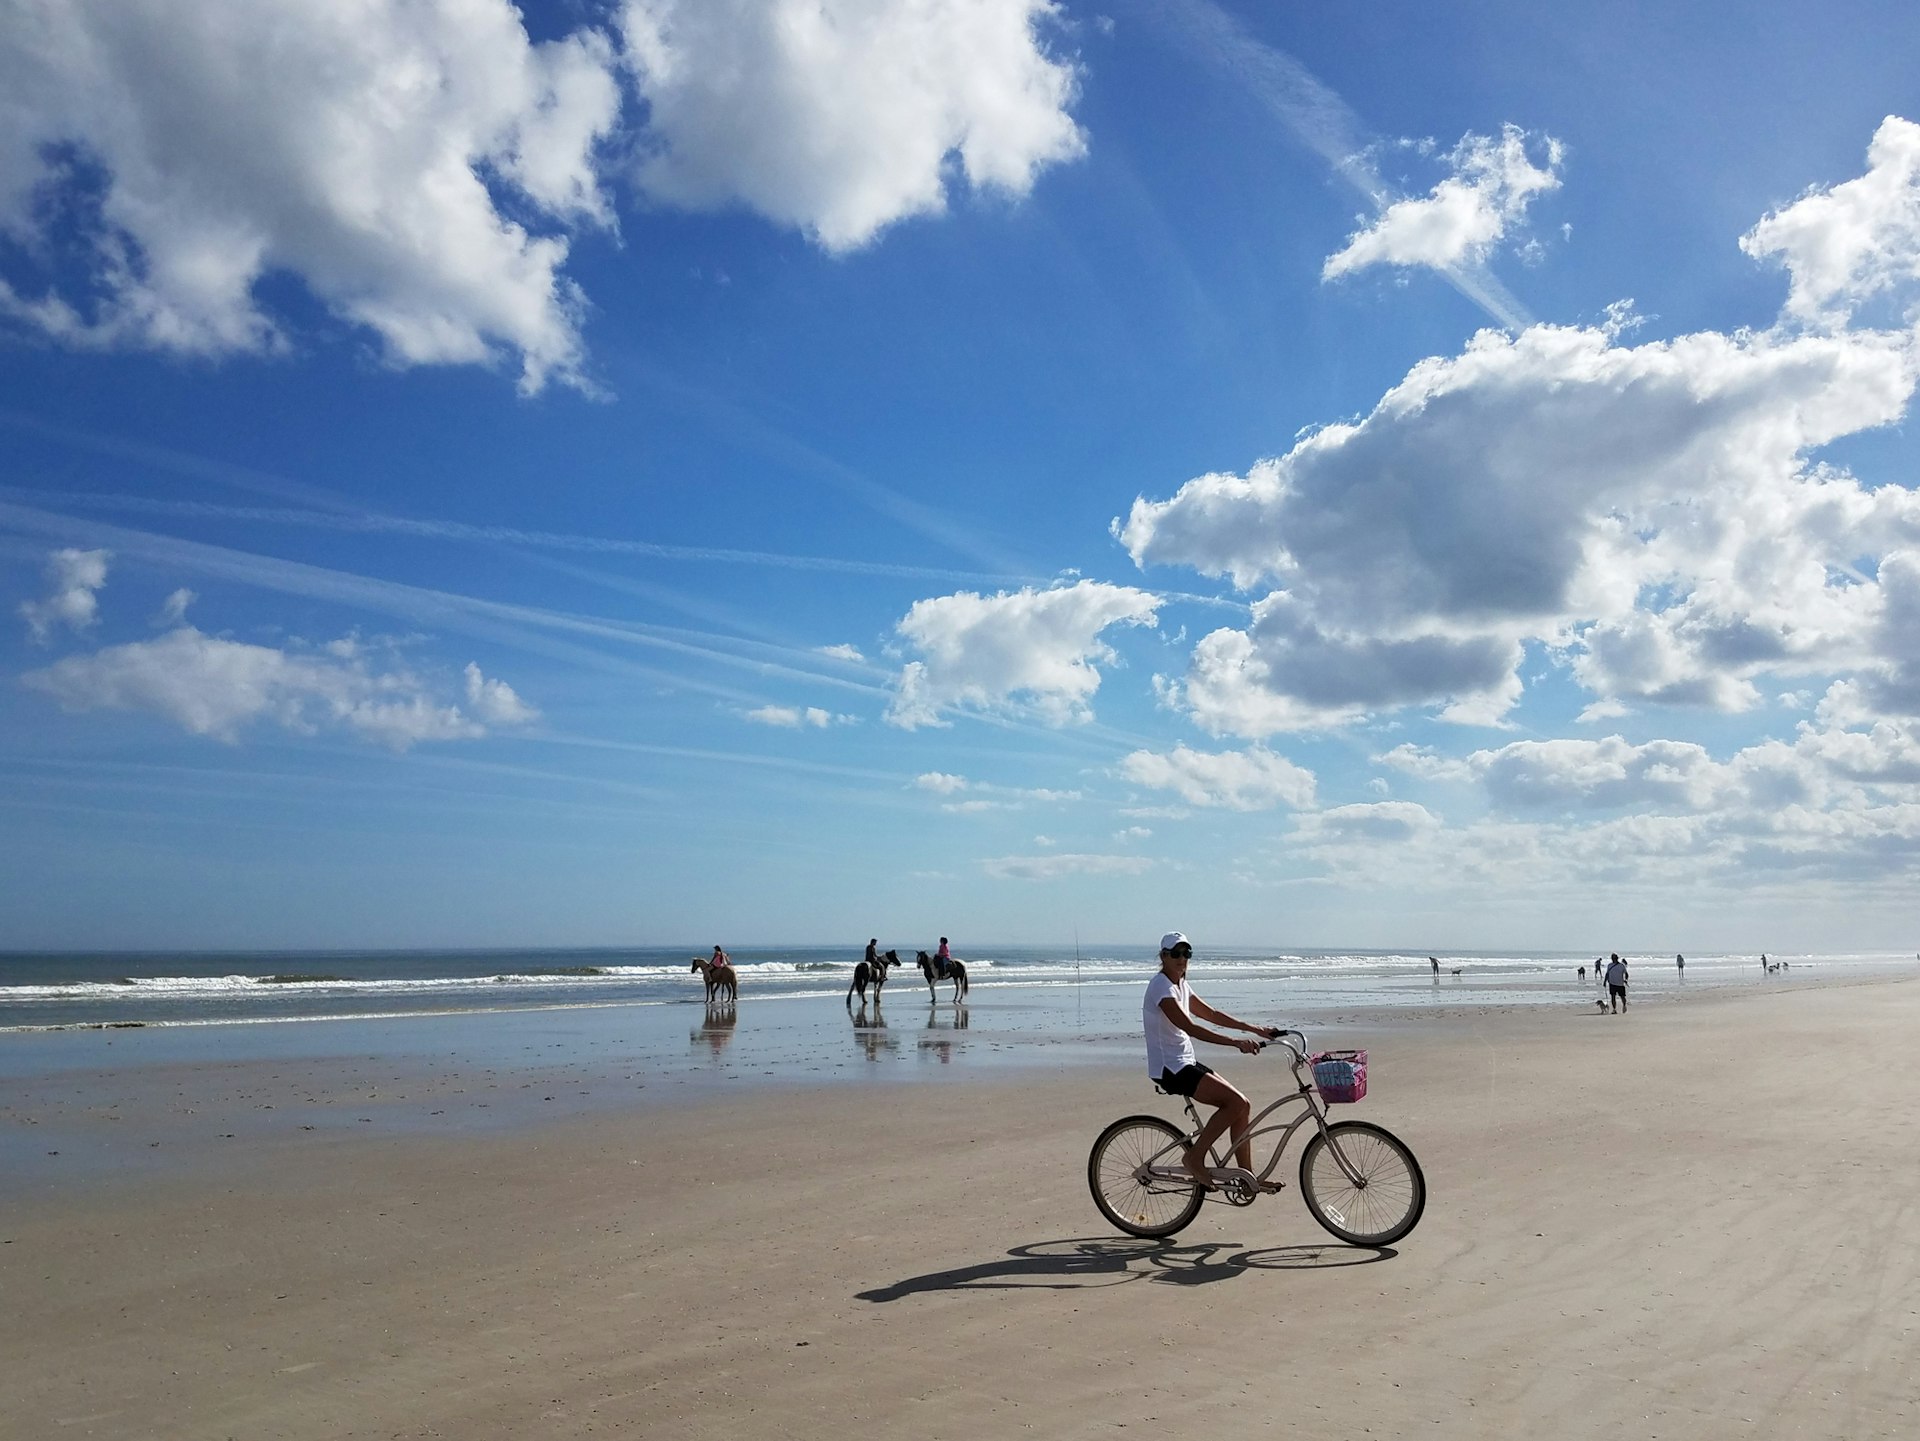 A woman rides a bicycle on a firm-sand beach. Behind her are three people on horseback